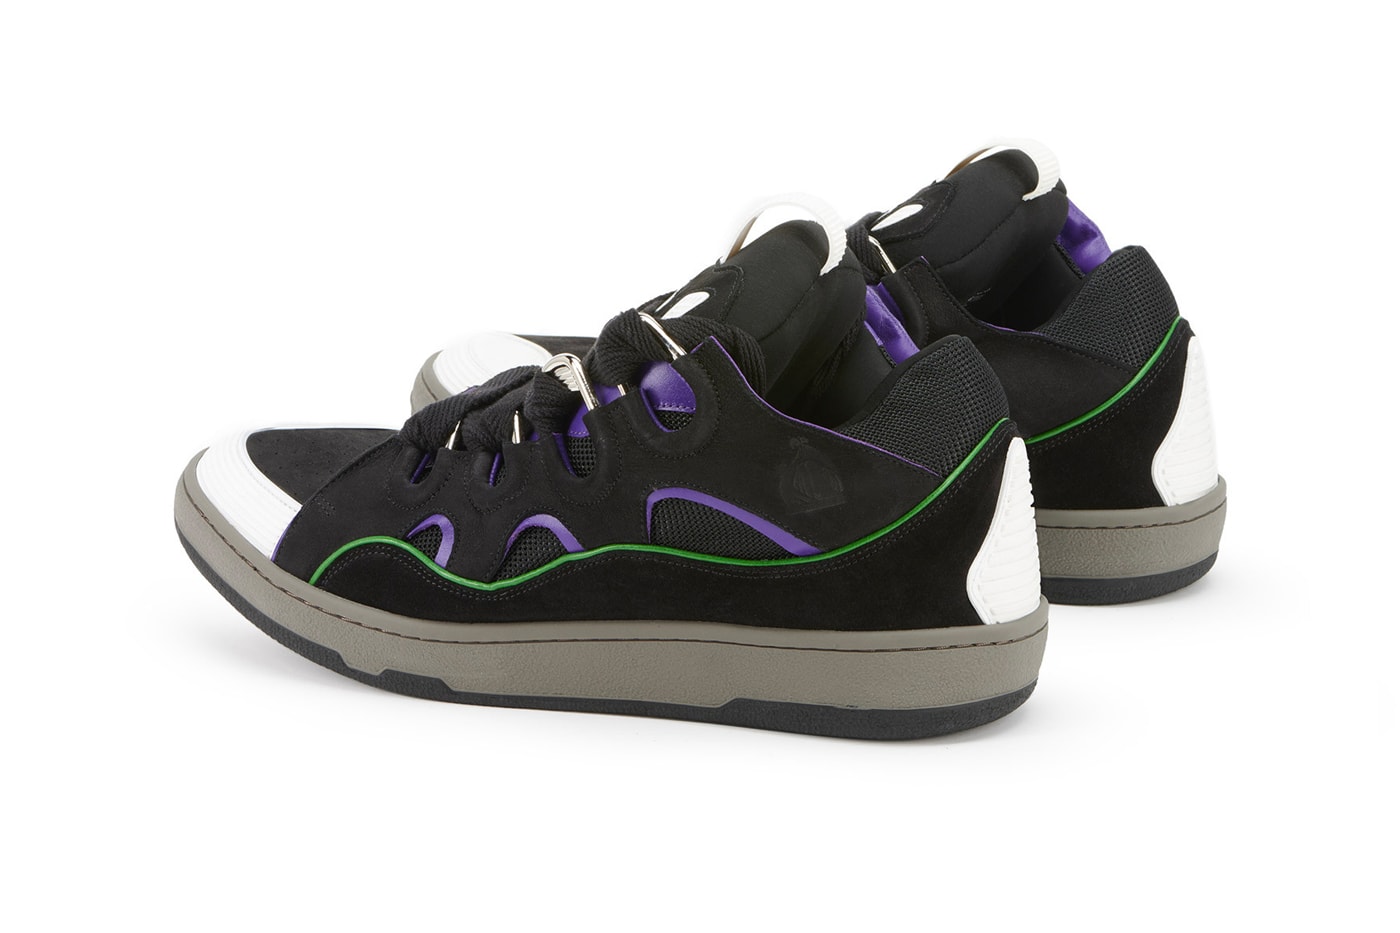 Lanvin Releases New Colors to Its $900 USD Osiris D3-Inspired CURB Sneakers fm skrk11 dra1 p21b145 Bruno Sialelli 